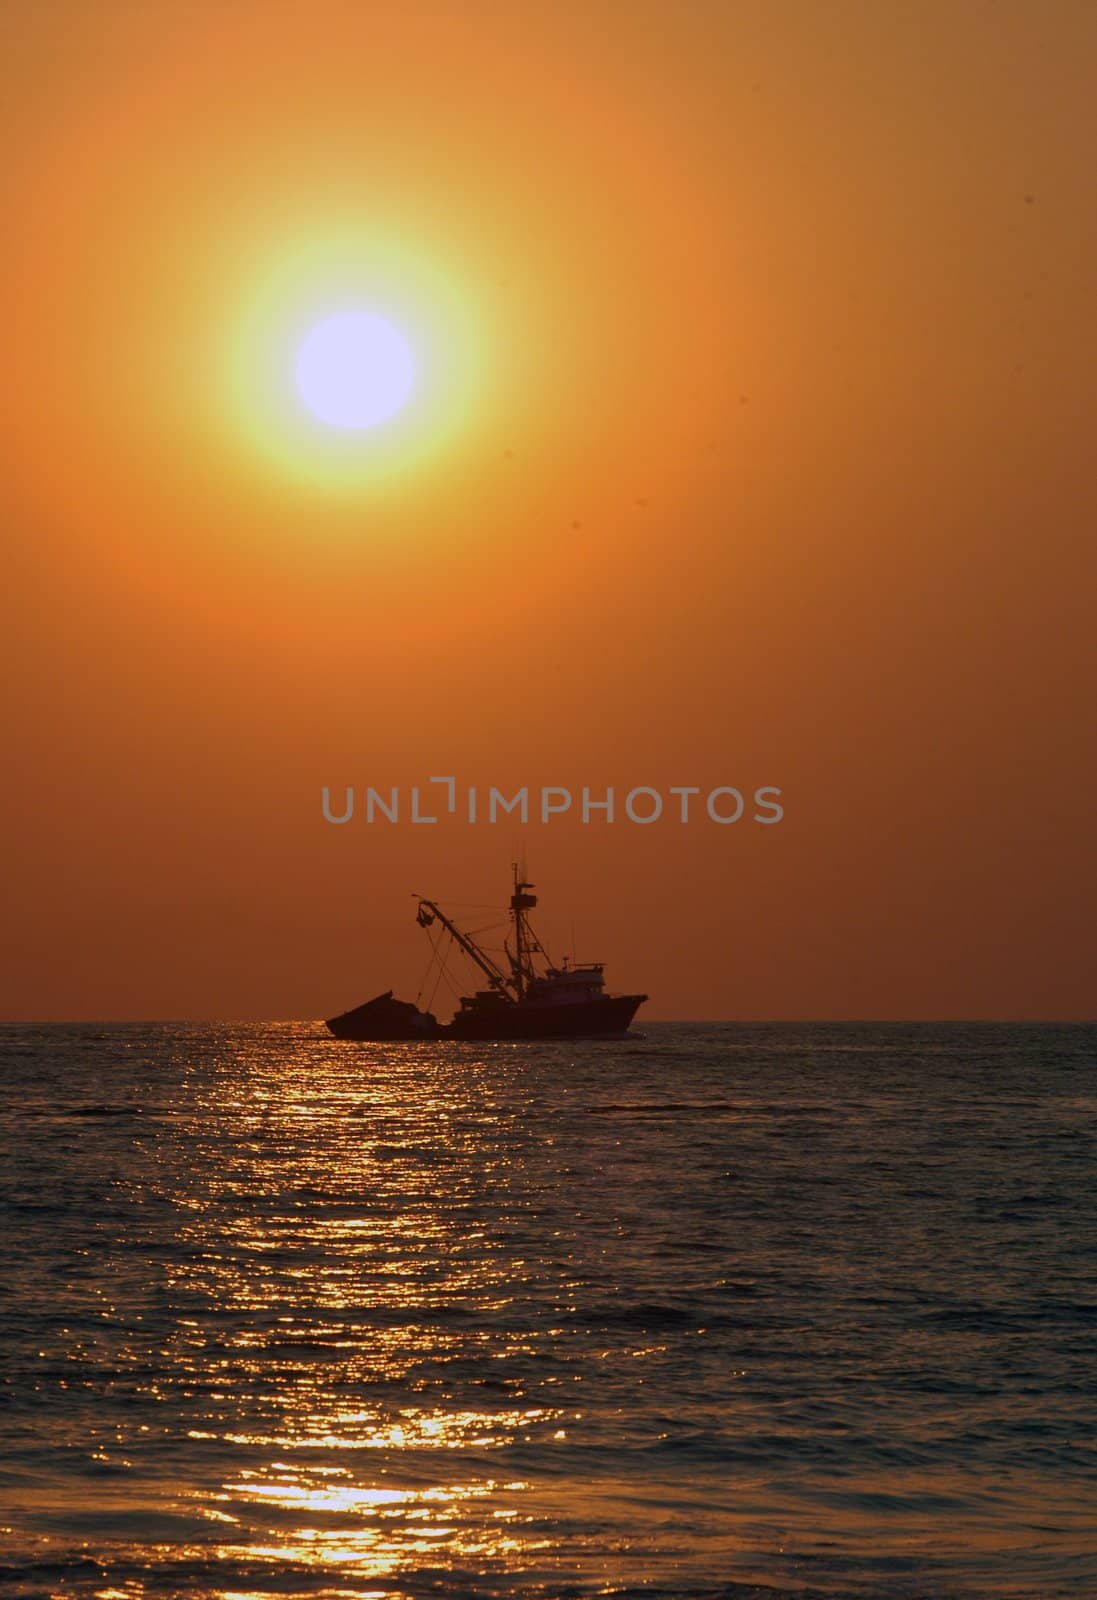 Boat on sea during sunset, Puerto Escondido, Mexico